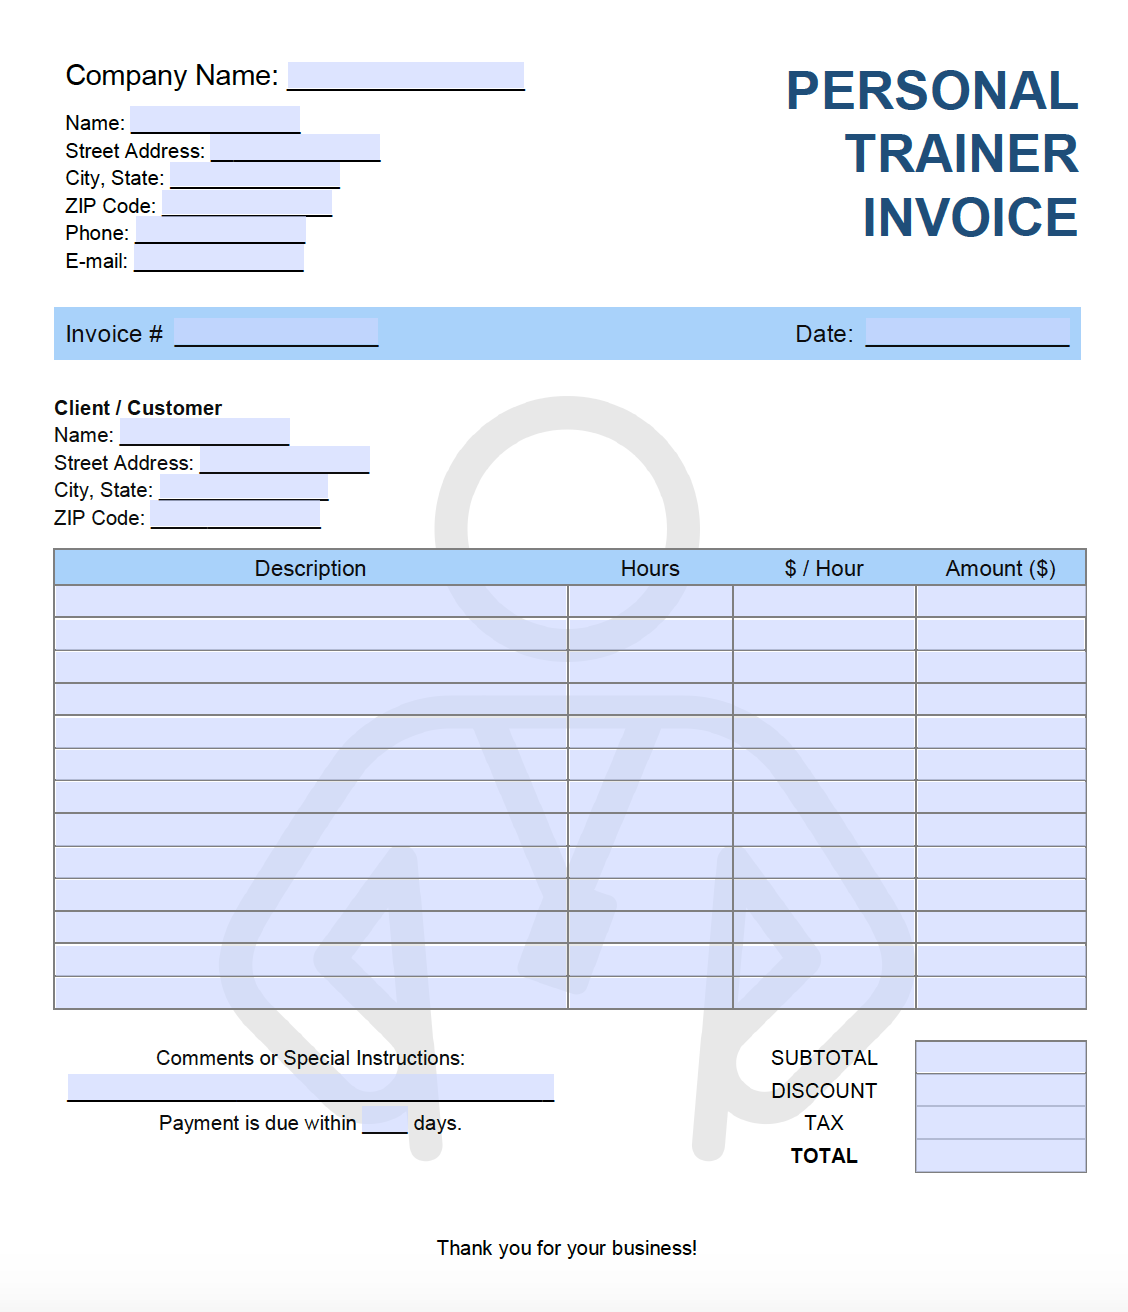 Free Personal Trainer Invoice Template  PDF  WORD  EXCEL Throughout Individual Invoice Template